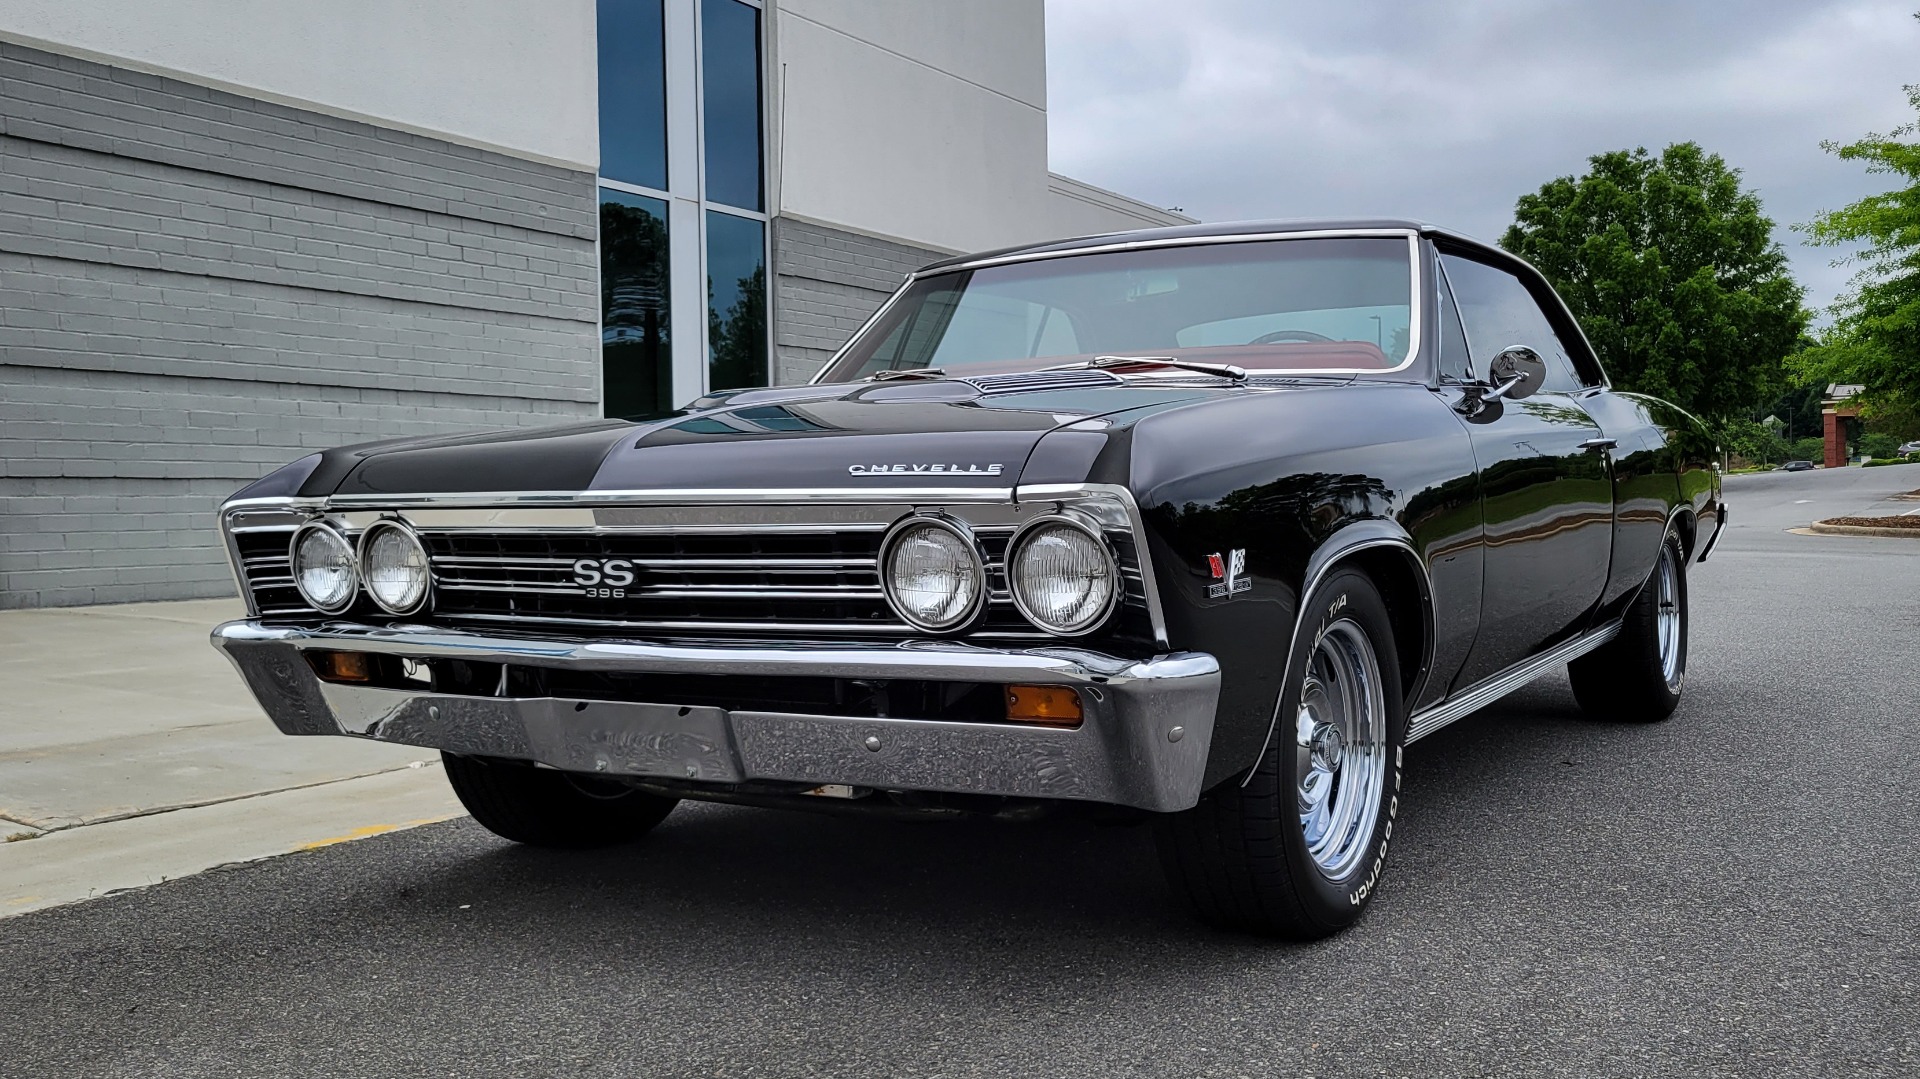 Used 1967 Chevrolet CHEVELLE SS 369 / HARD-TOP / 4-SPEED / ICE COLD AIR / POWER STEERING / RESTOERD for sale $70,000 at Formula Imports in Charlotte NC 28227 4